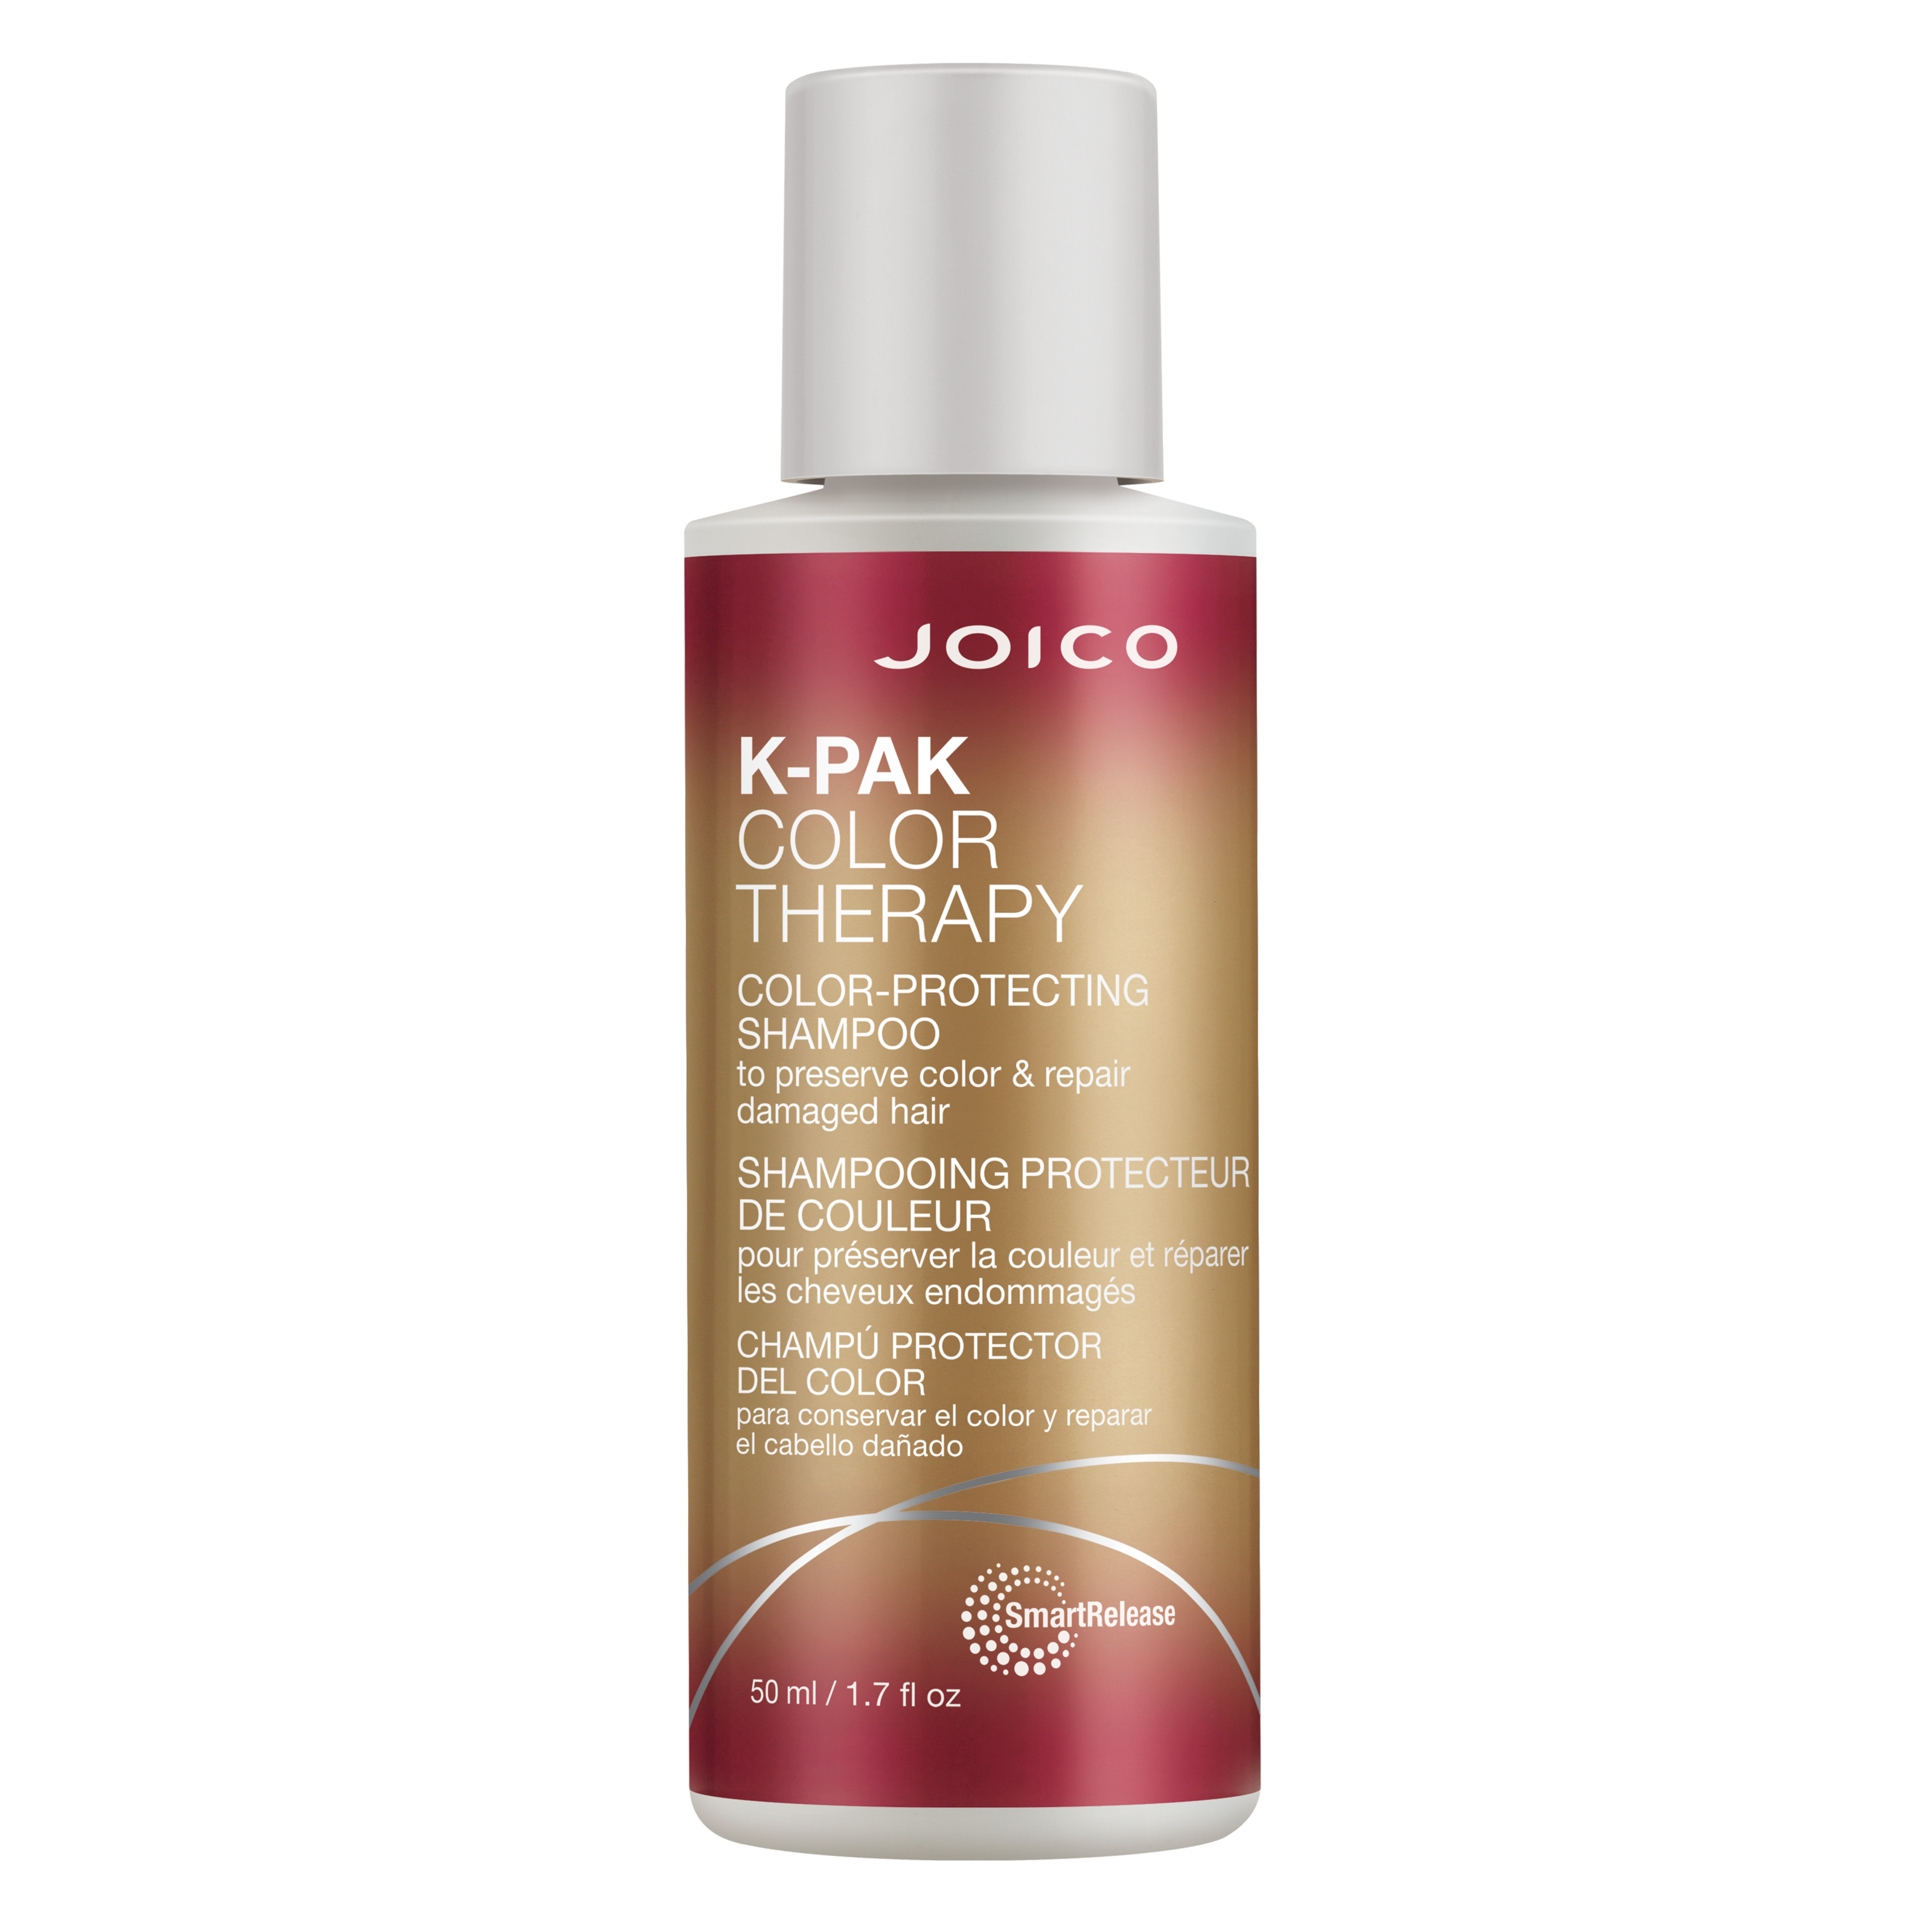 Joico K-pak Color Therapy Color-Protecting Shampoo 50 ml